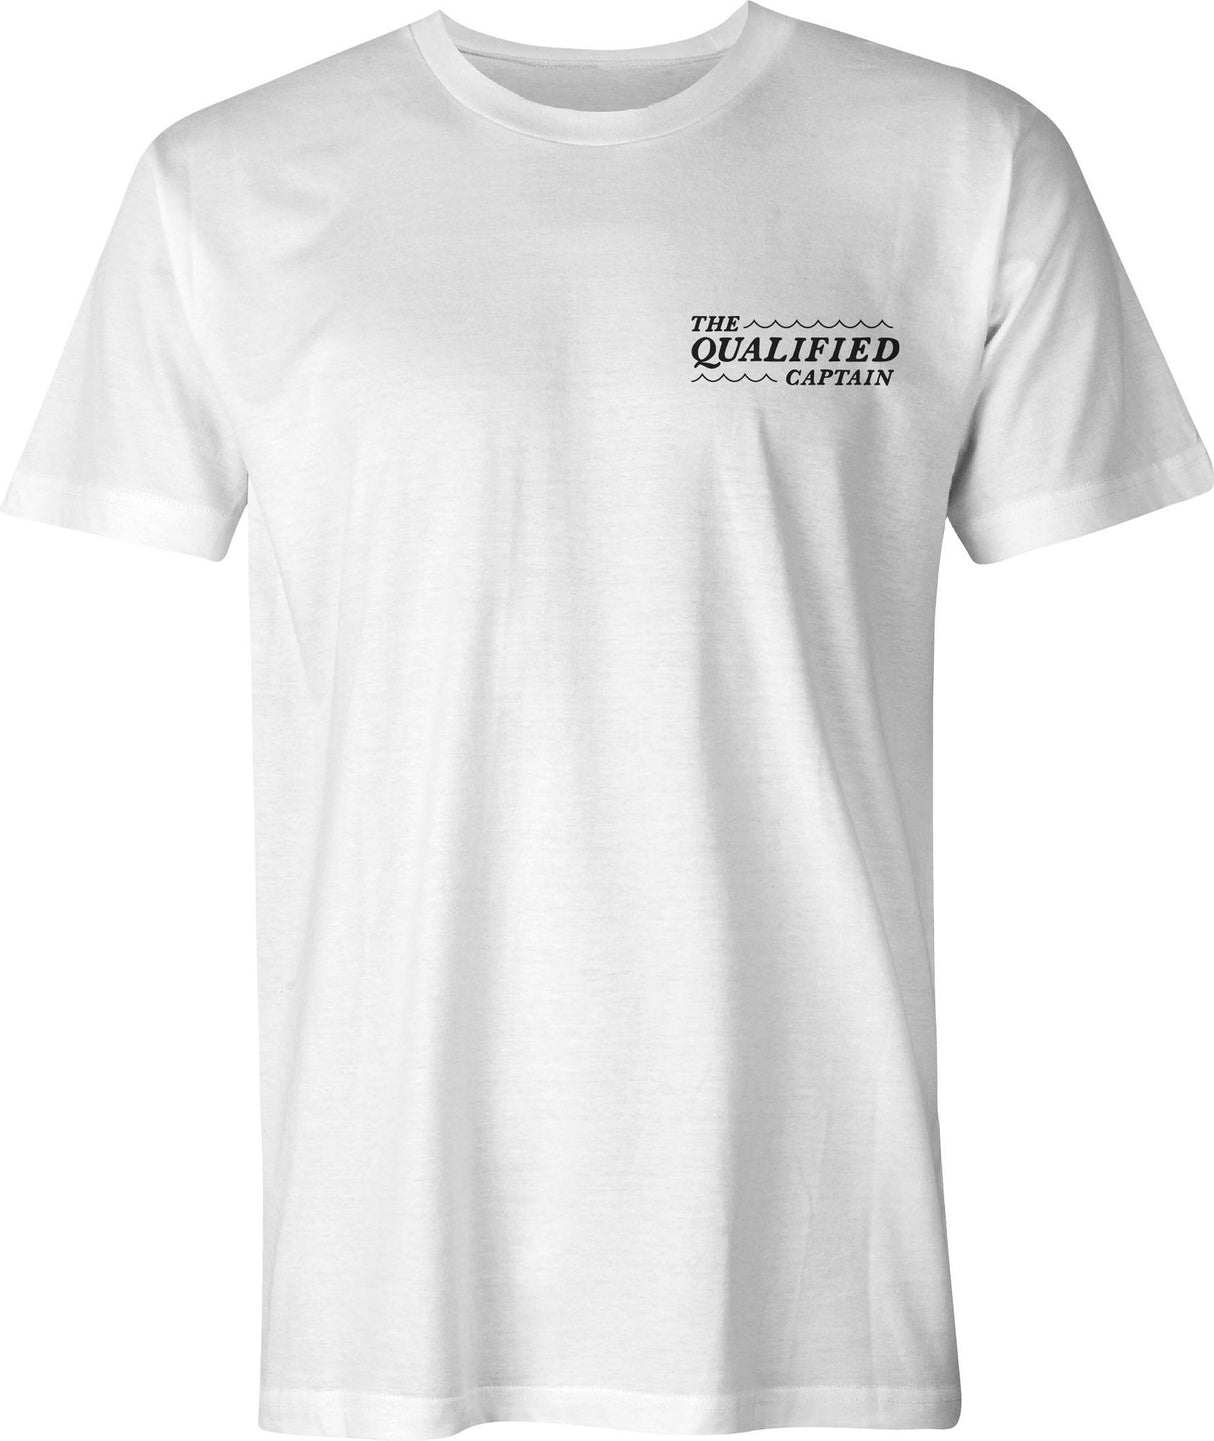 The Qualified Captain Channel Marker Short Sleeve